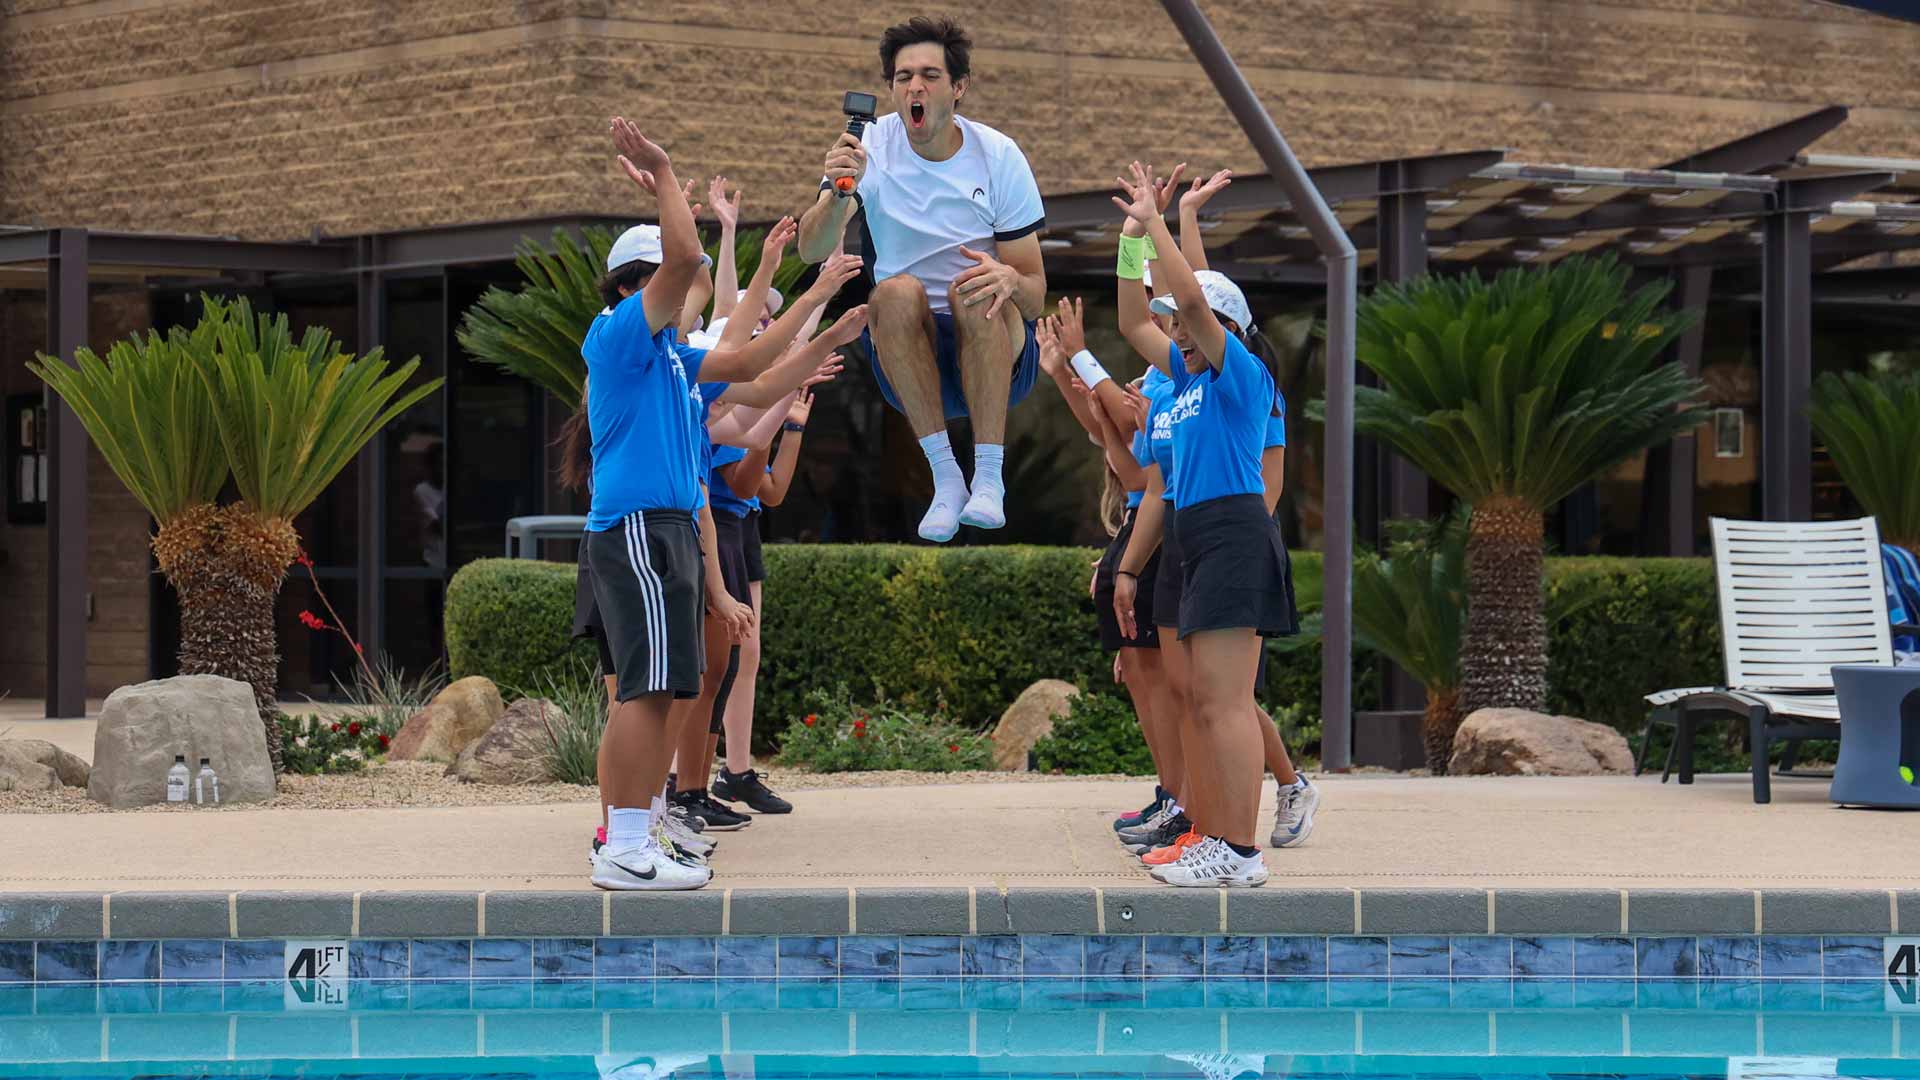 Nuno Borges celebrates his title at the Arizona Tennis Classic with a pool plunge.